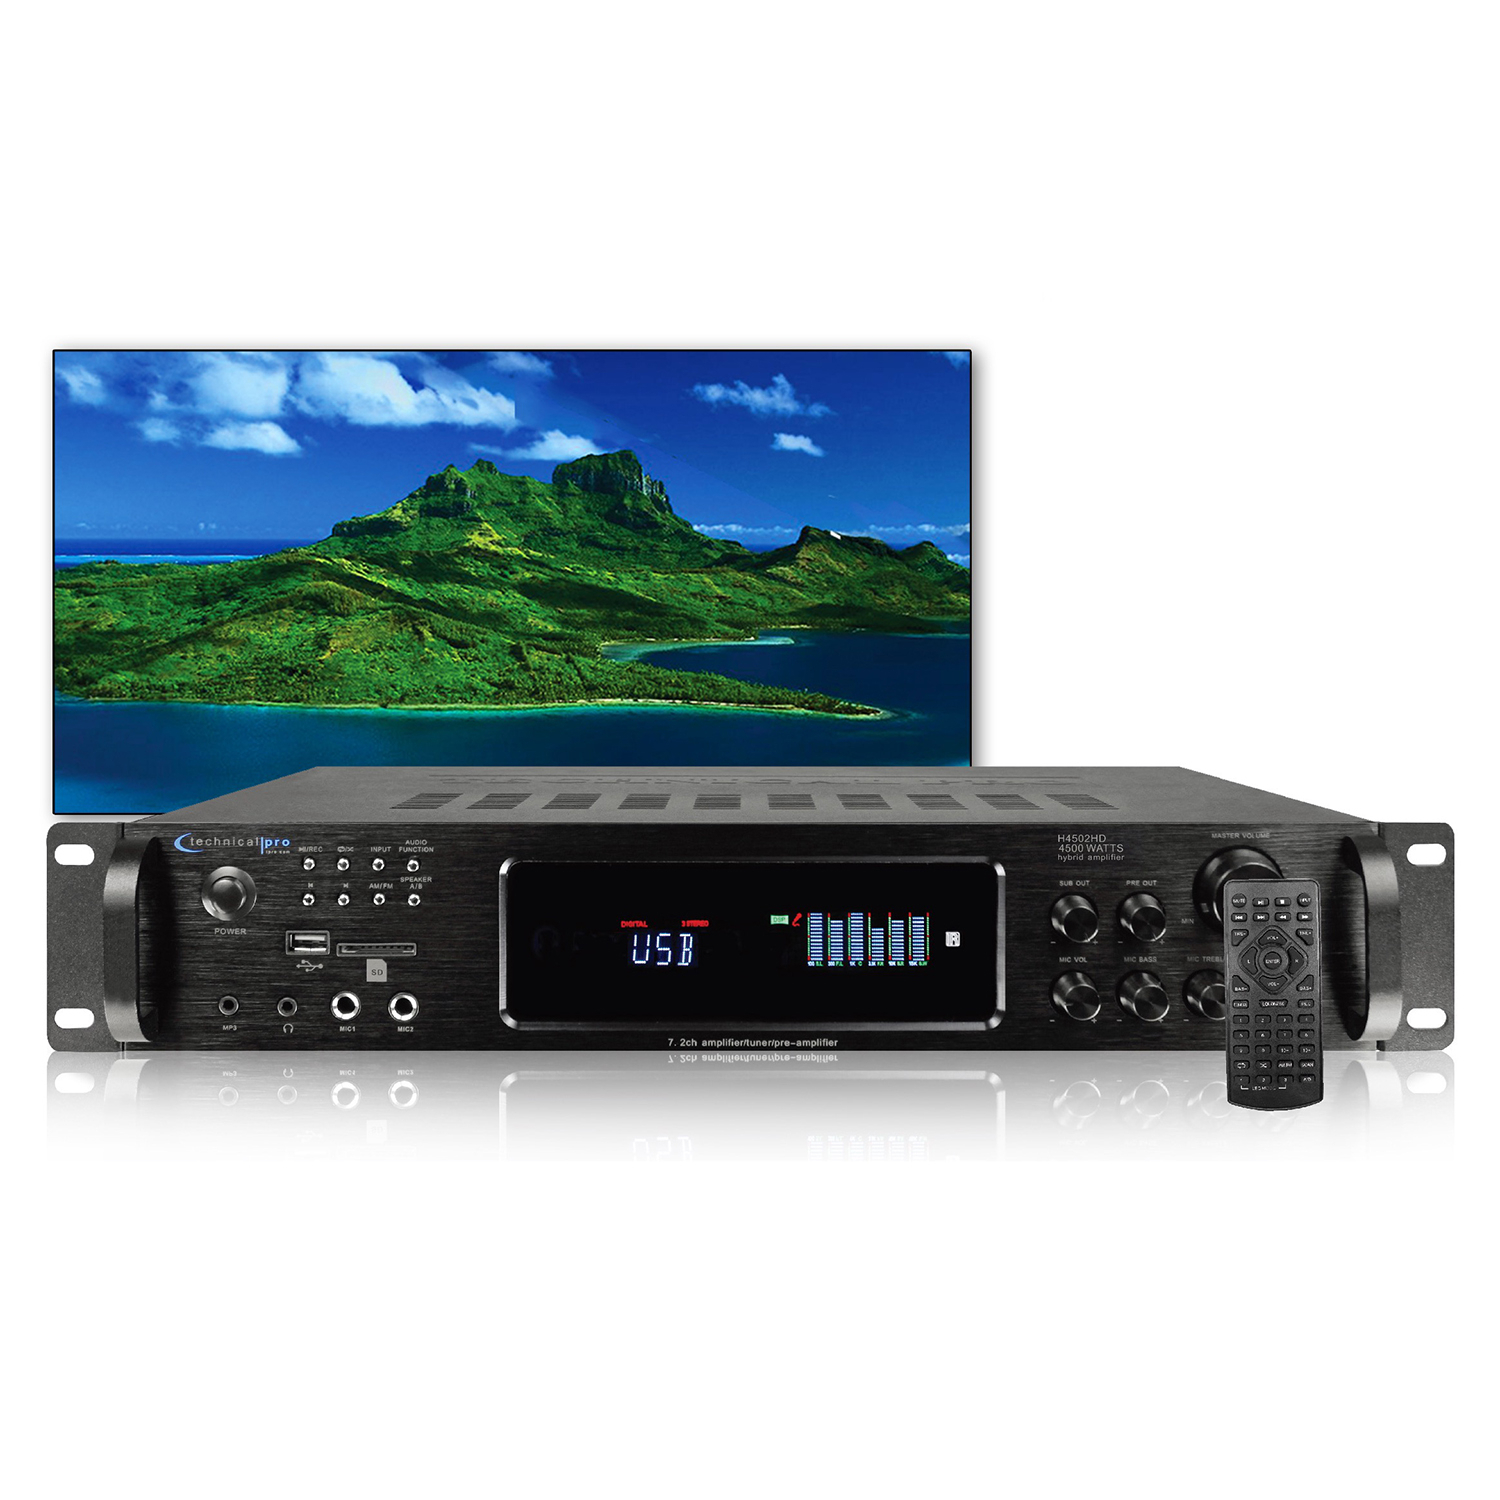 Technical Pro 4500 Watts Digital Hybrid Amplifier Preamp Tuner With 2 Mic, RCA, HDMI, Headphone, USB And SD Card Inputs, FM Radio & Remote